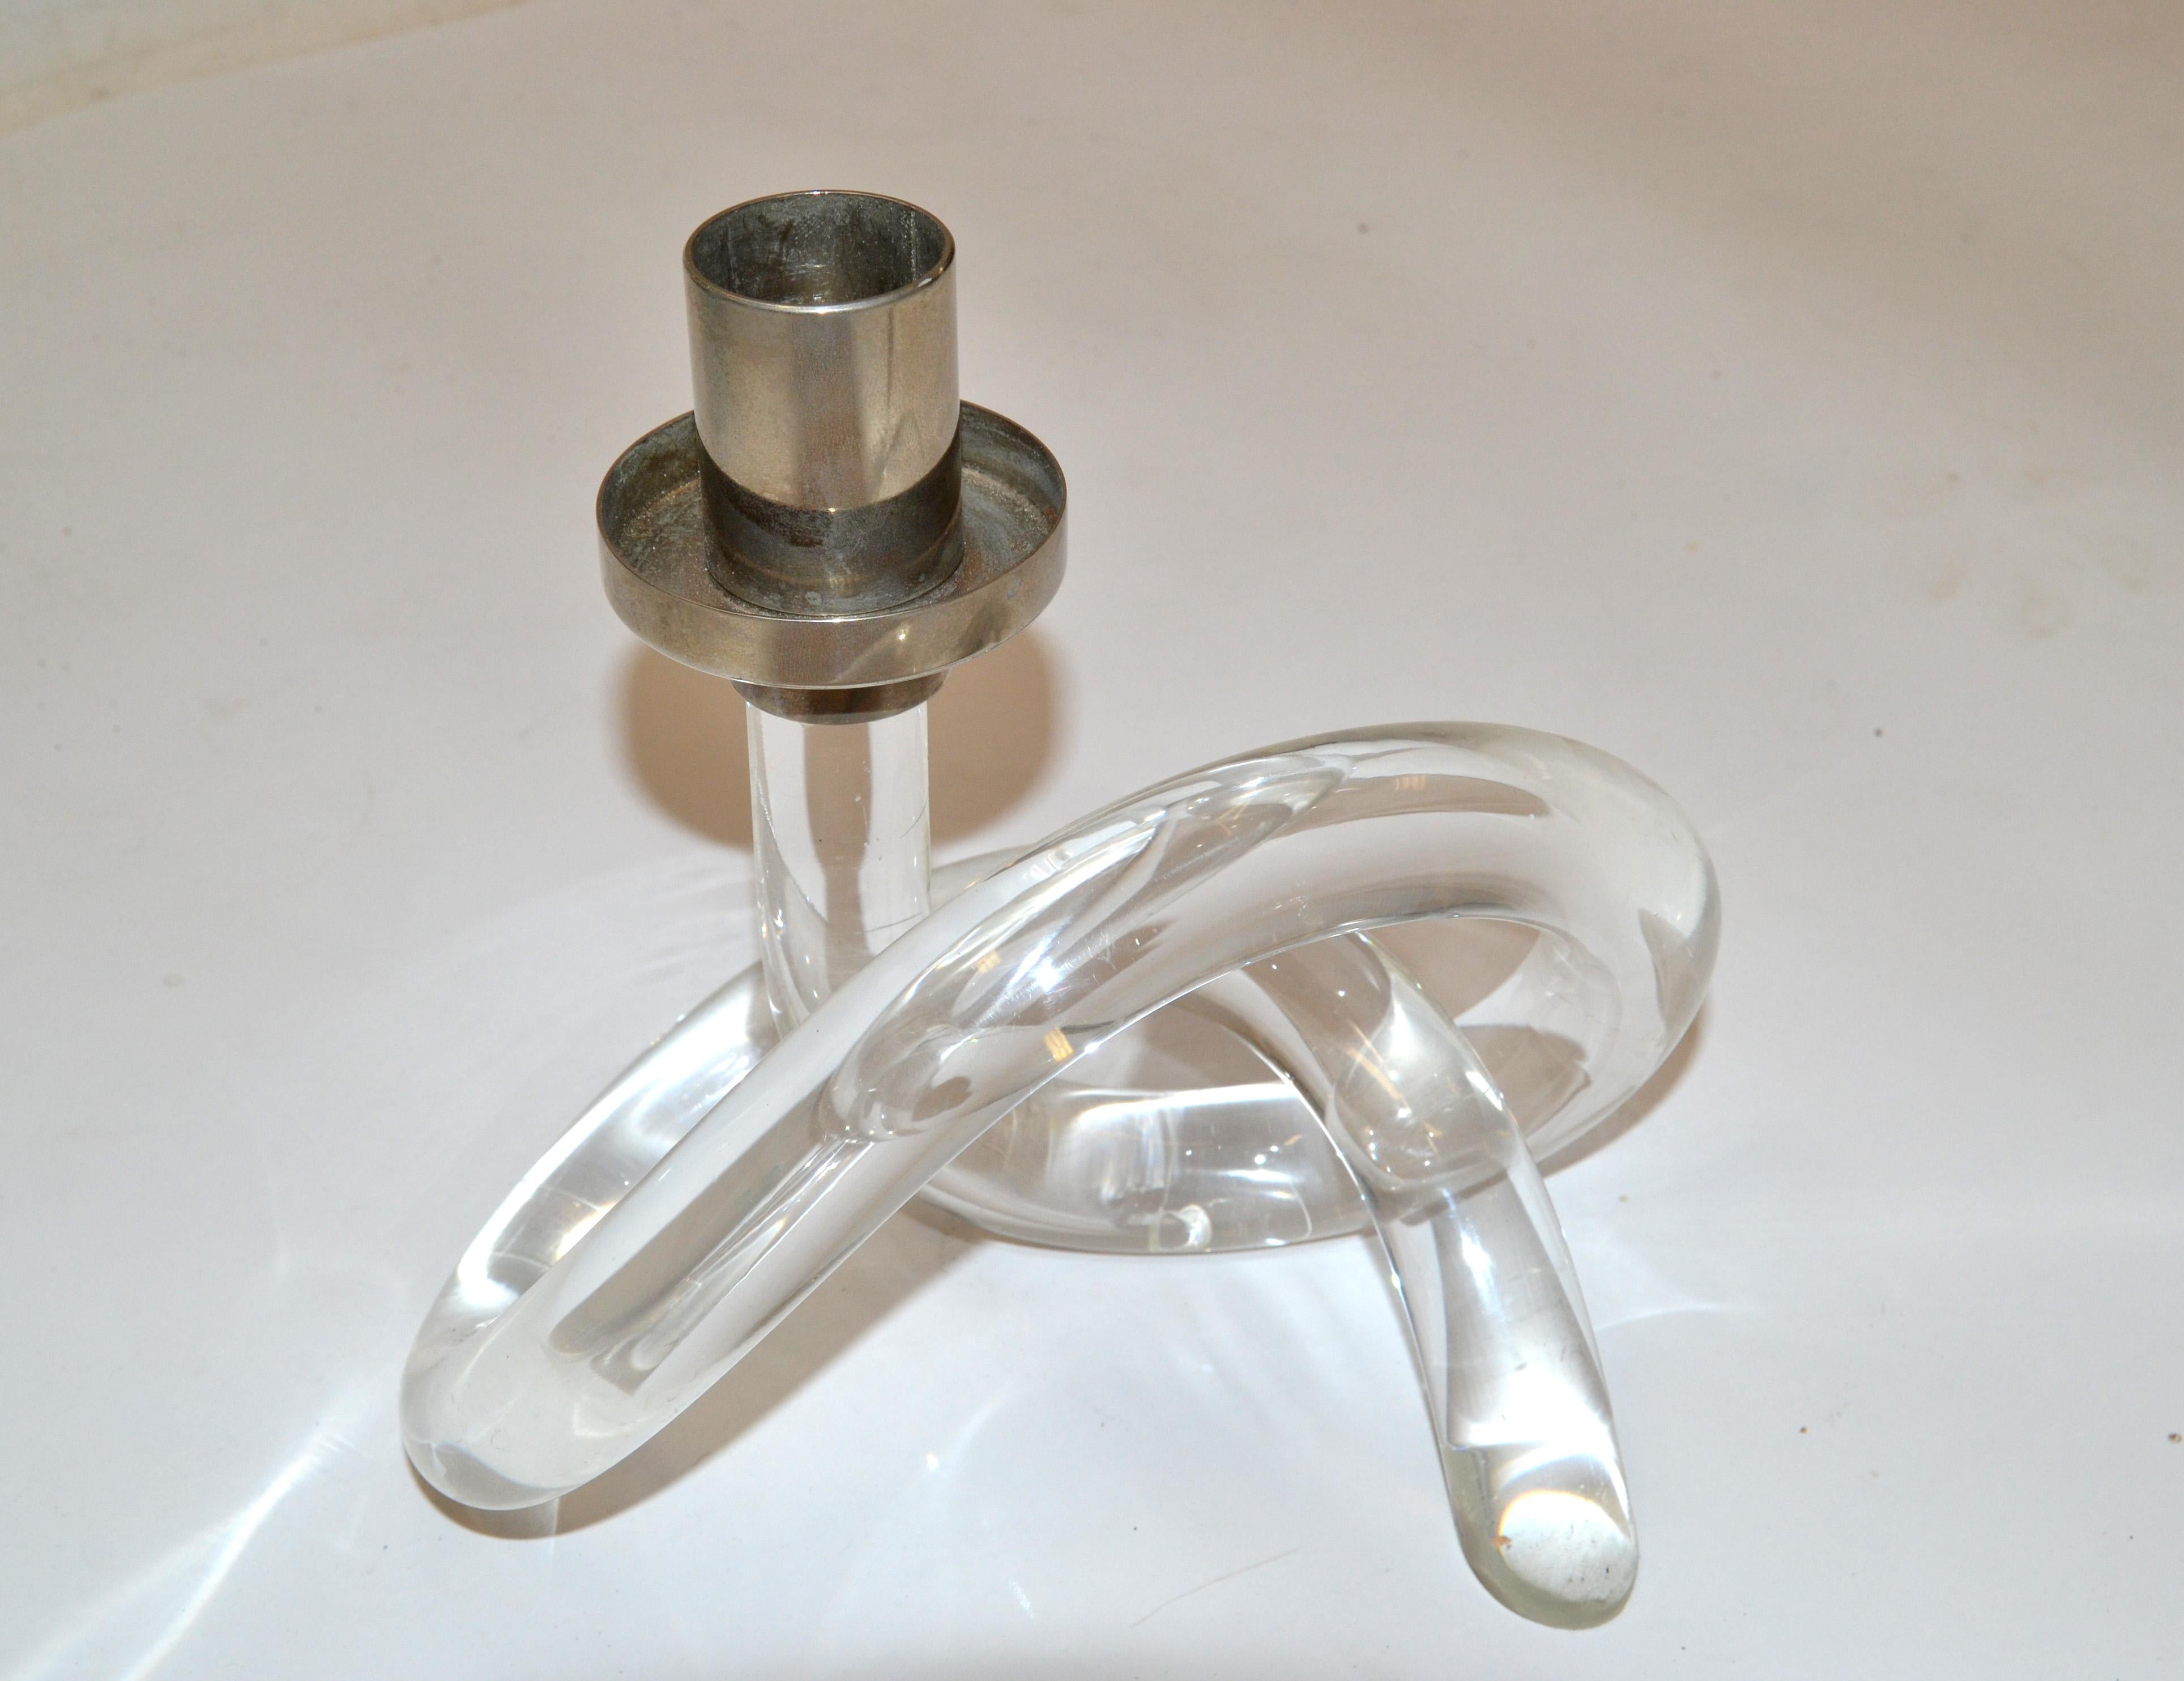 American Dorothy Thorpe Lucite and Nickel Candleholder in Pretzel Shape